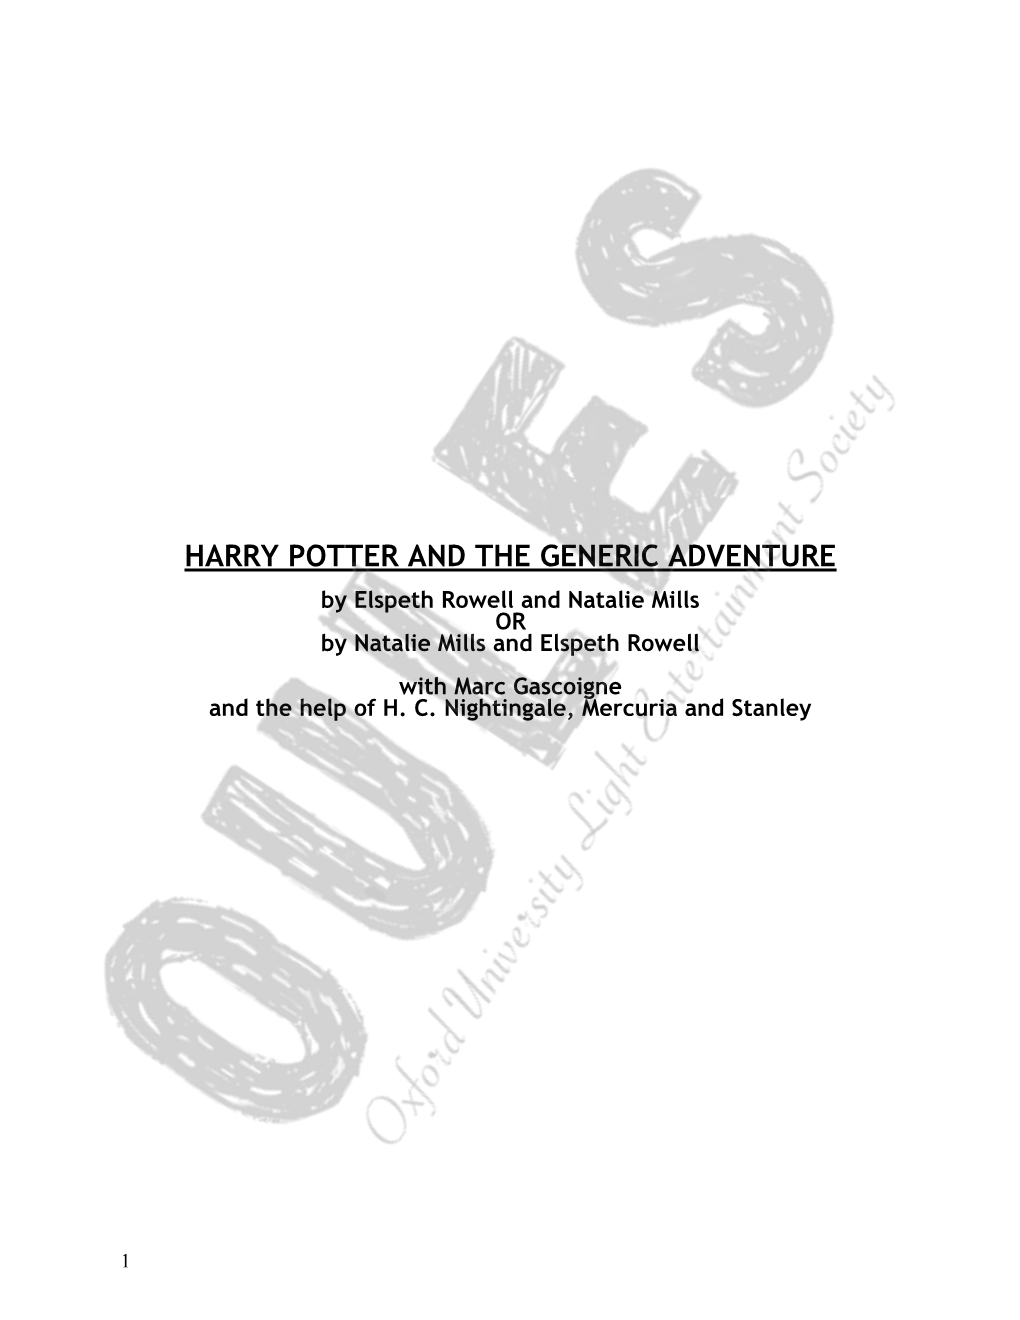 HARRY POTTER and the GENERIC ADVENTURE by Elspeth Rowell and Natalie Mills OR by Natalie Mills and Elspeth Rowell with Marc Gascoigne and the Help of H